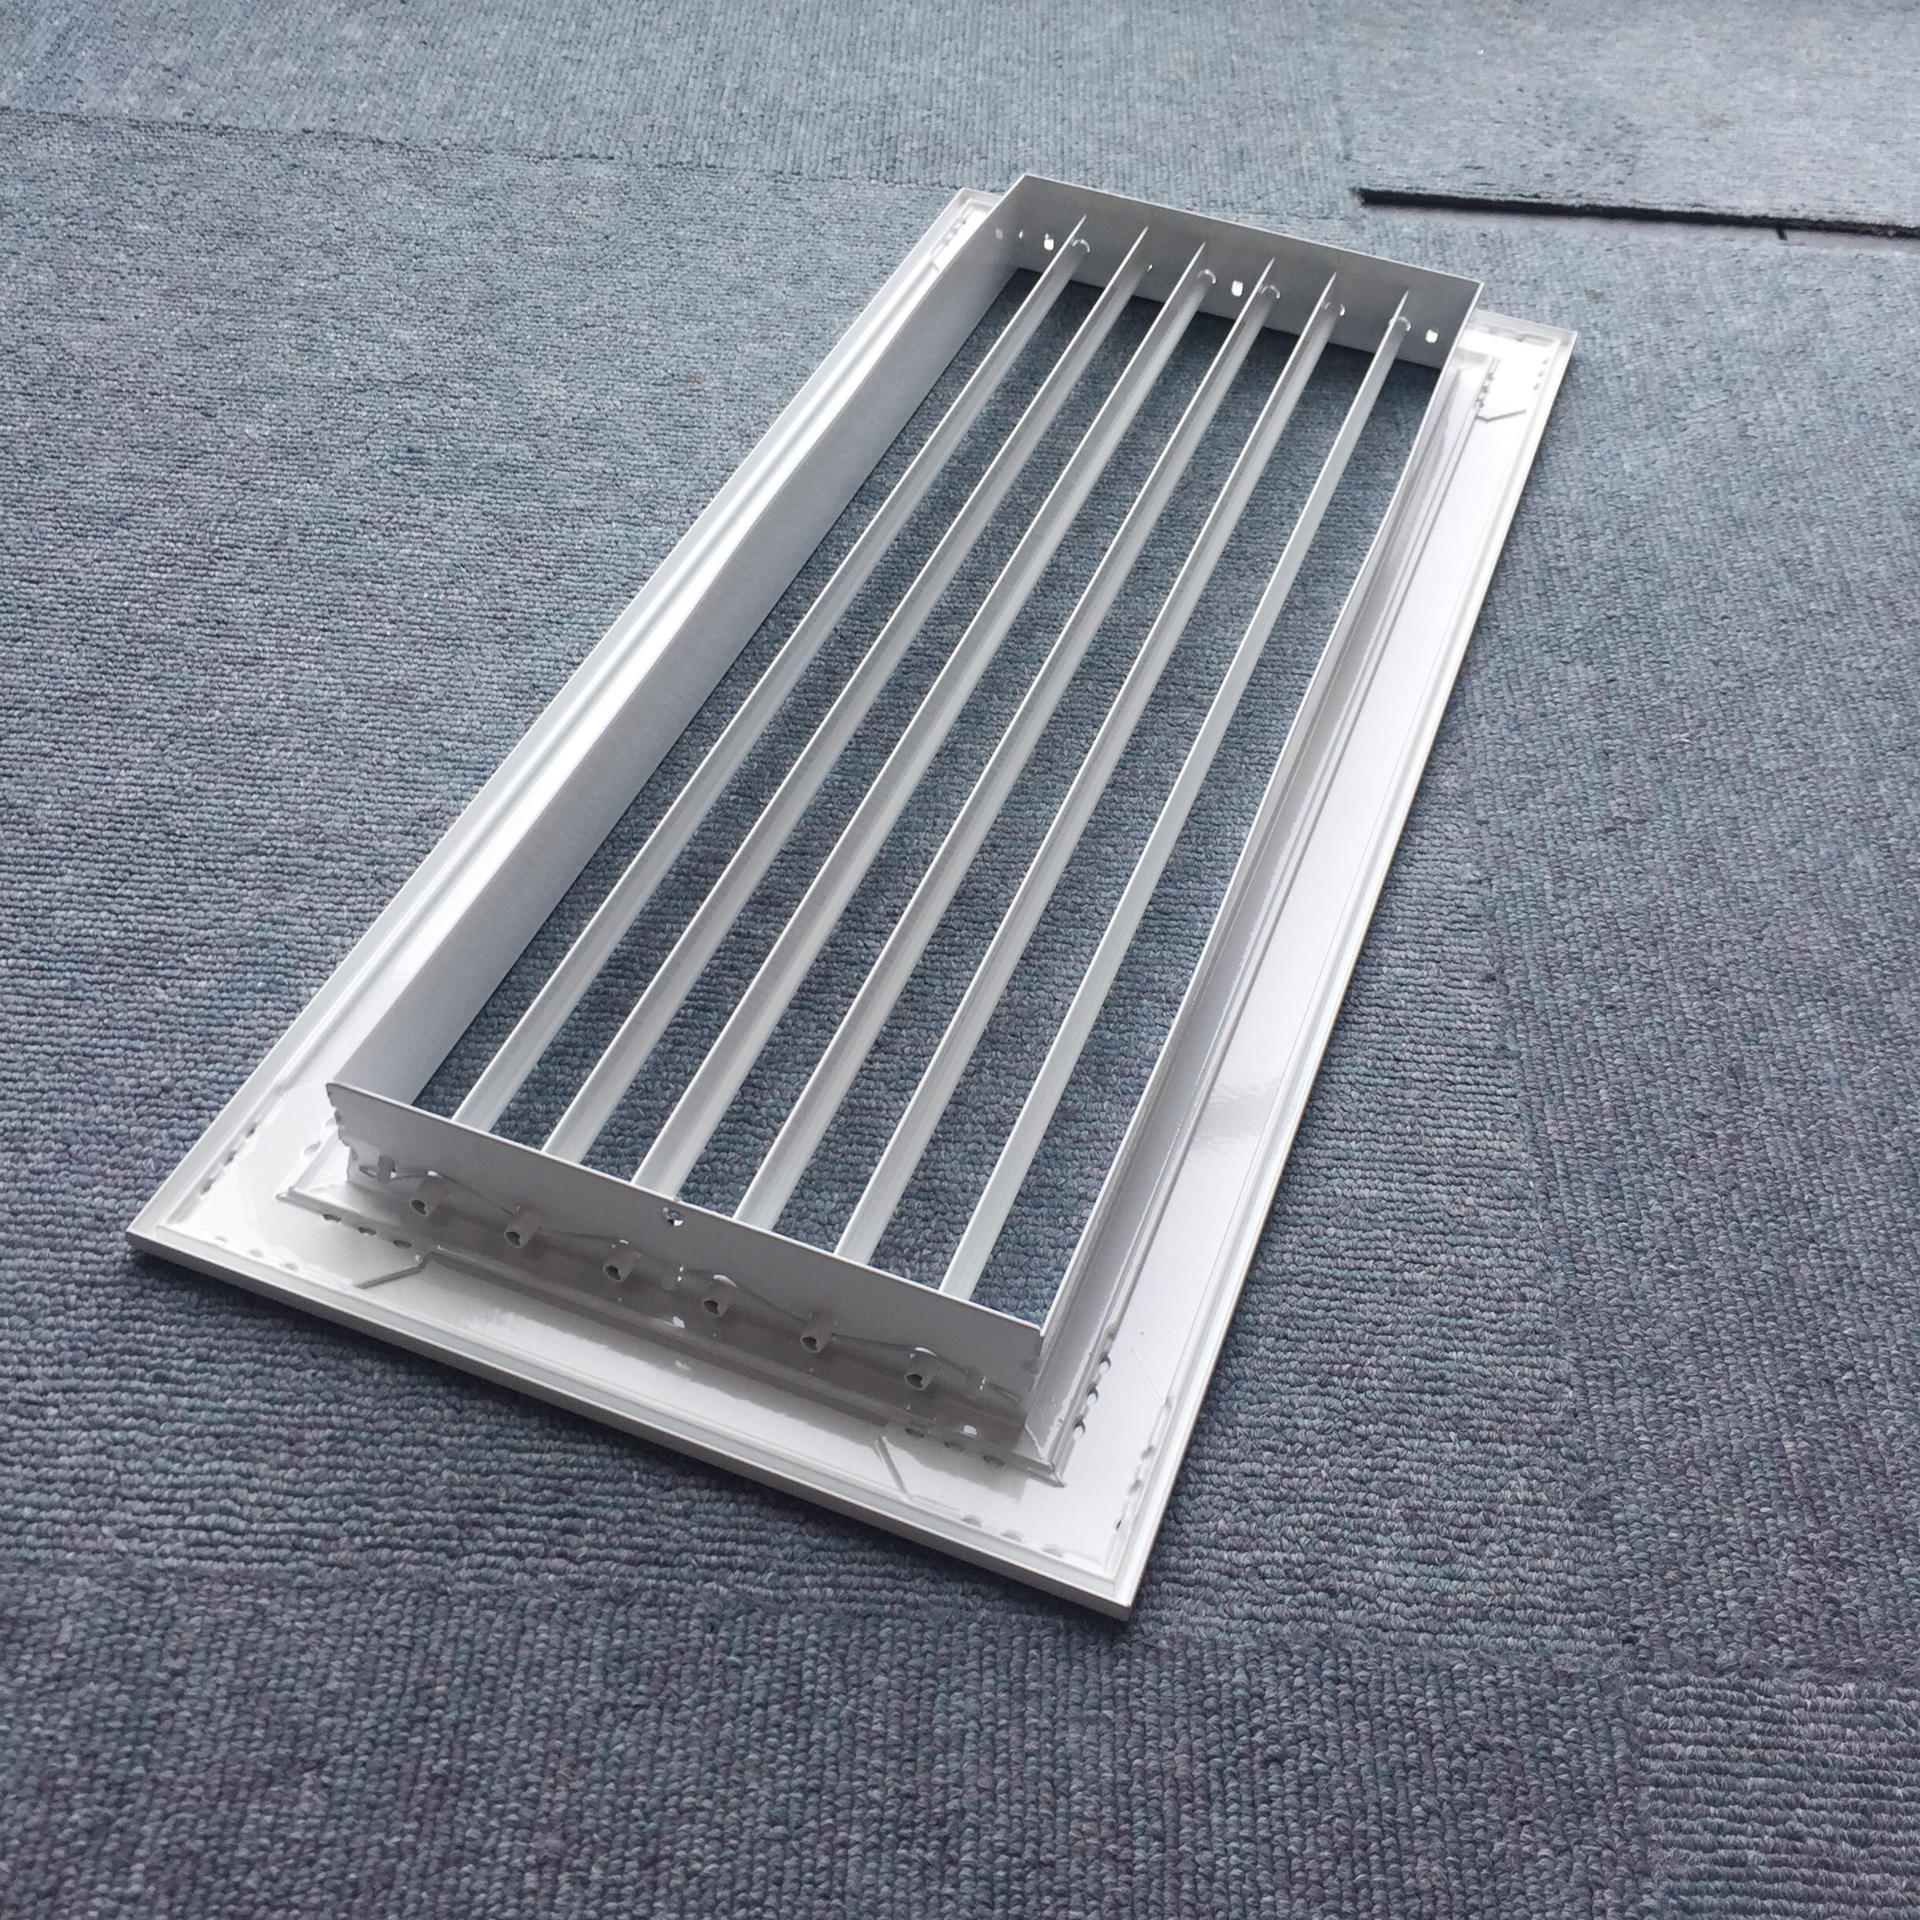 HVAC SYSTEM  Best Quality Wall Mounted Air Ducting   Aluminum Supply Air Single Deflection Grille for Ventilation